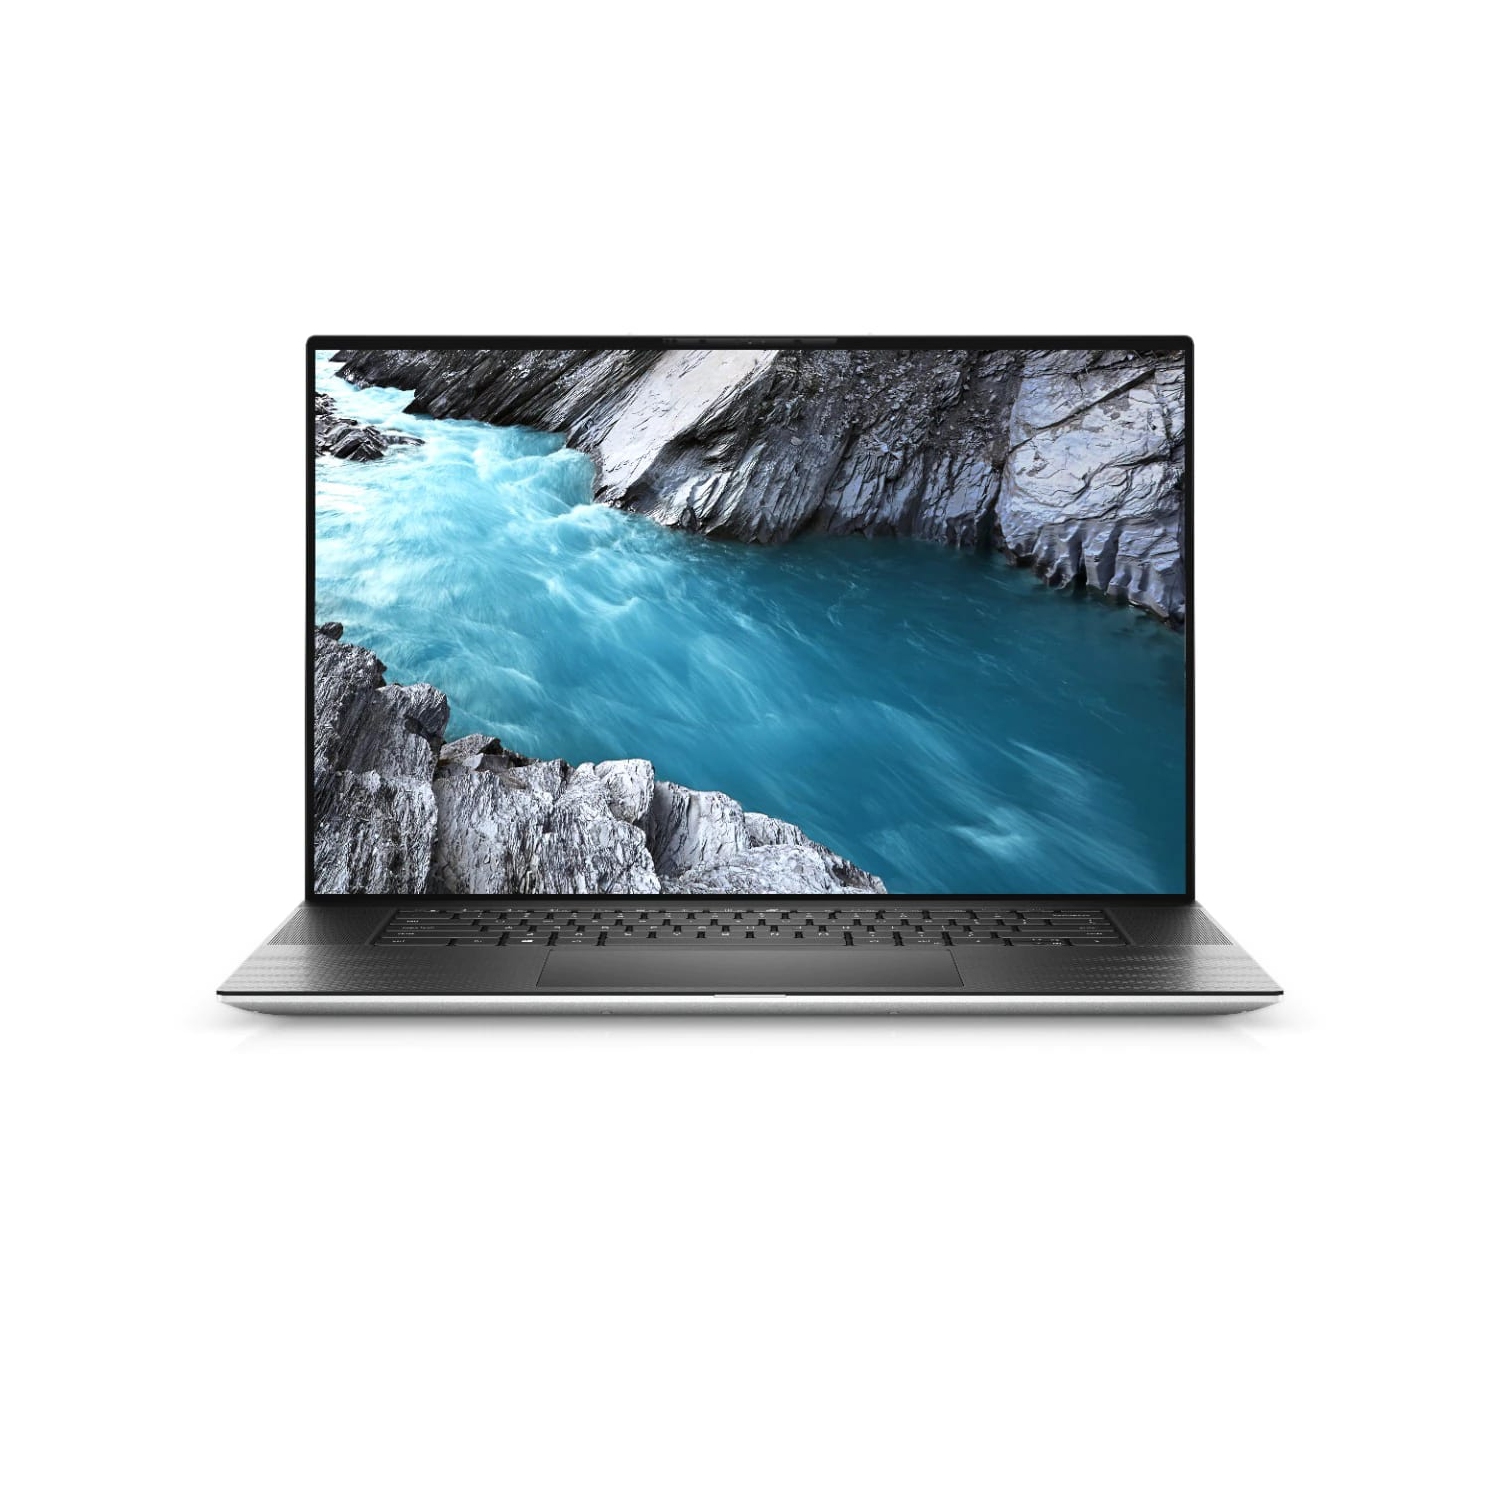 Refurbished (Excellent) - Dell XPS 17 9700 Laptop (2020) | 17" 4K Touch | Core i7 - 1TB SSD - 16GB RAM - 1650 Ti | 6 Cores @ 5 GHz - 10th Gen CPU Certified Refurbished